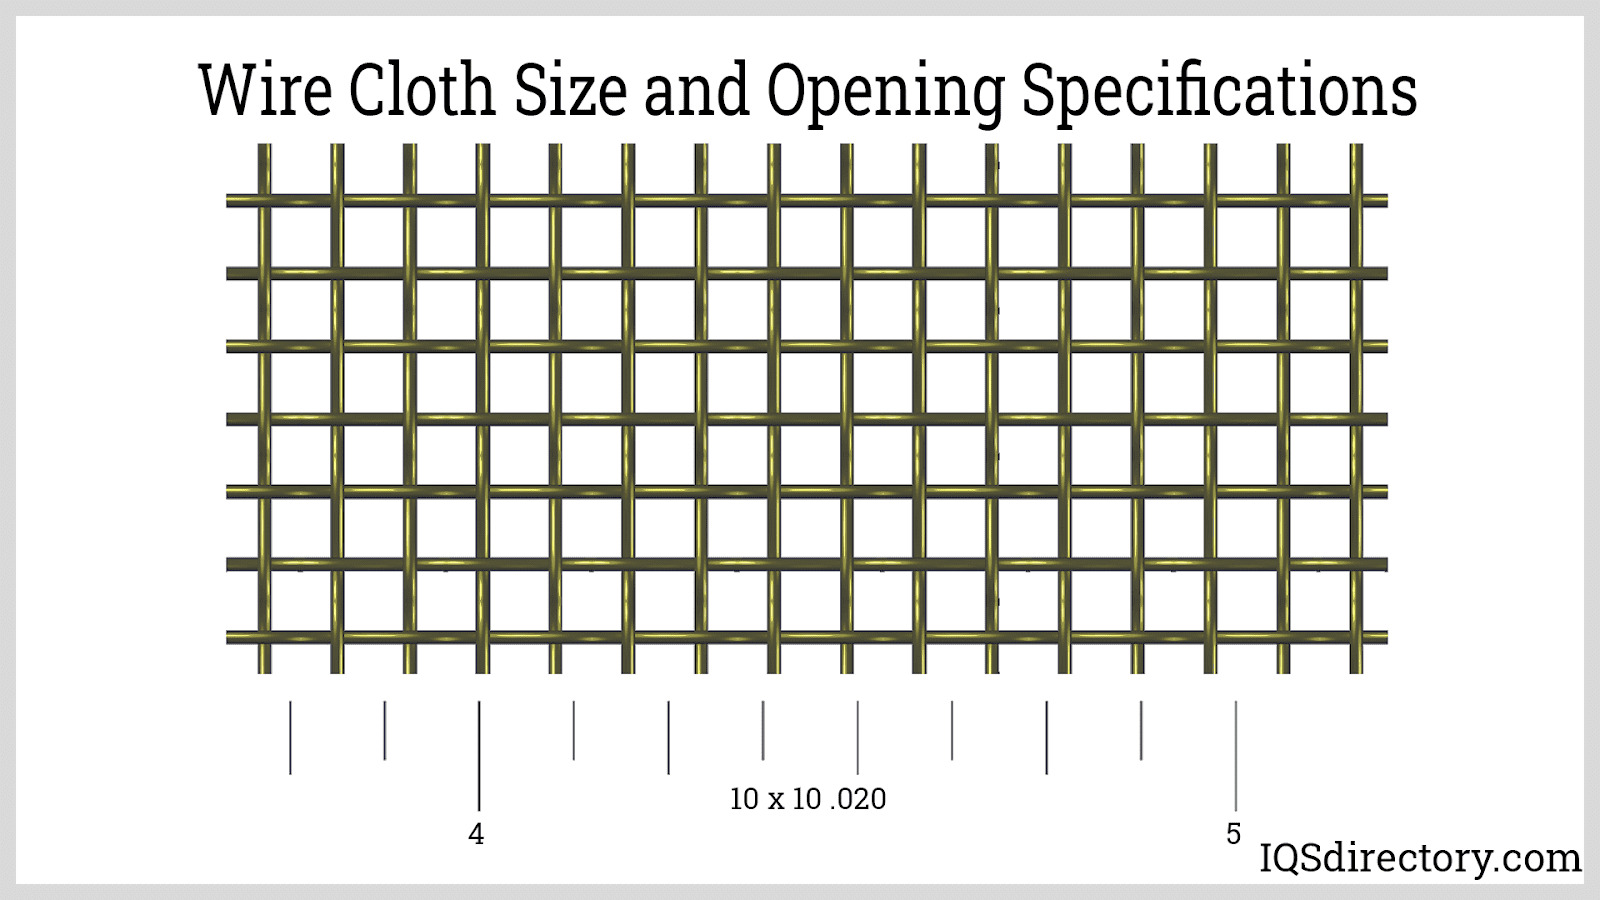 Wire Cloth Size and Opening Specifications